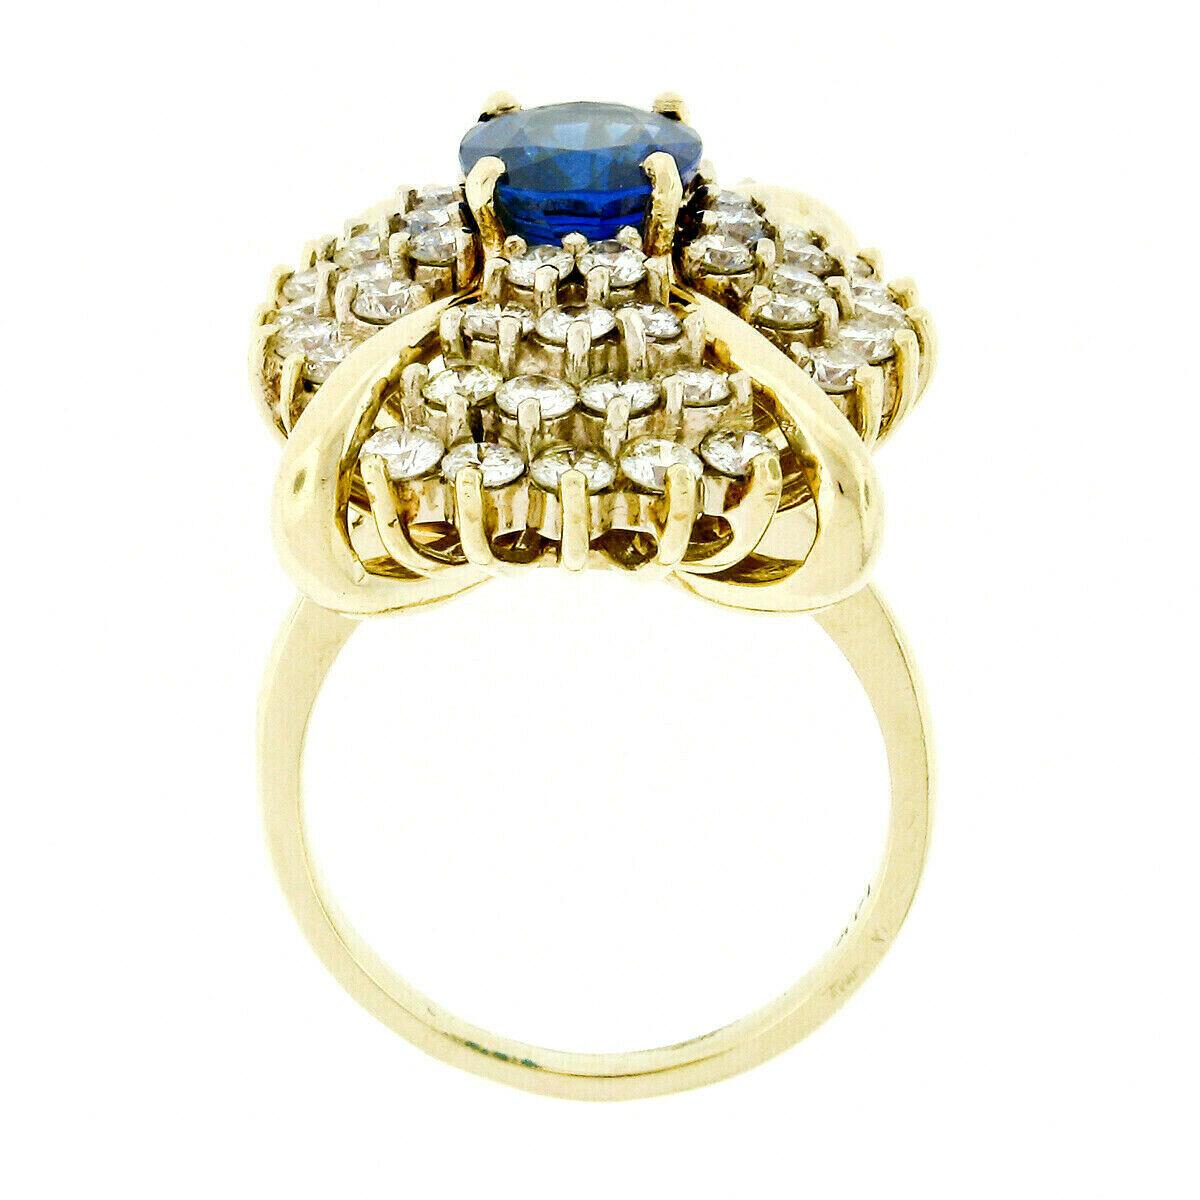 Large Vintage 14k Gold 6.24ctw GIA Oval Ceylon Sapphire & Diamond Cocktail Ring For Sale 1